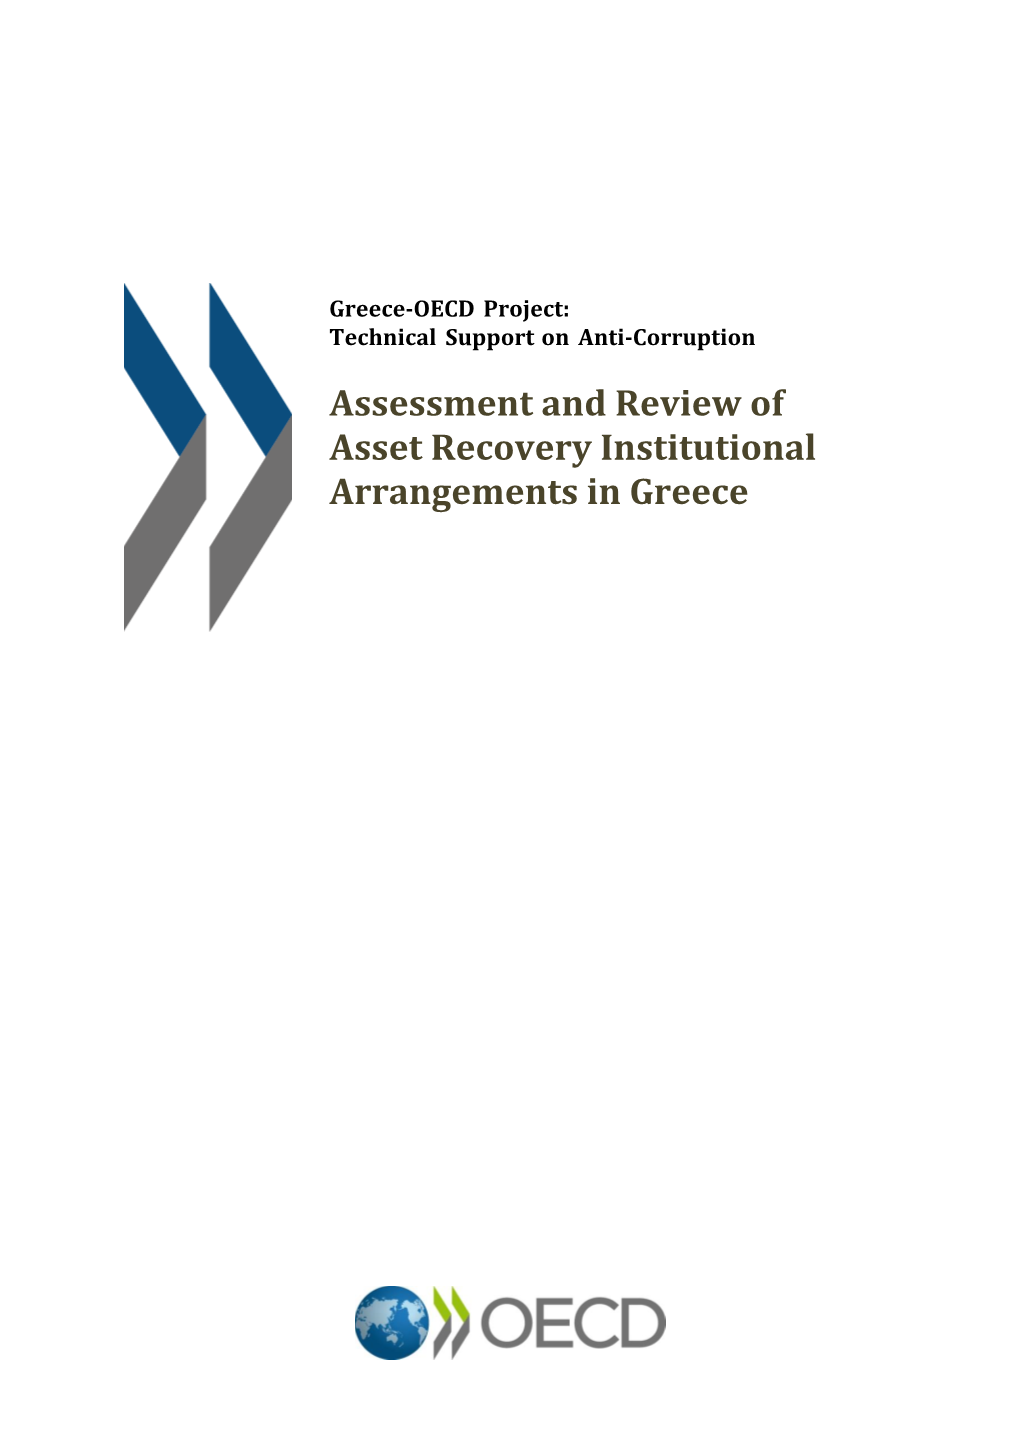 Assessment and Review of Asset Recovery Institutional Arrangements in Greece